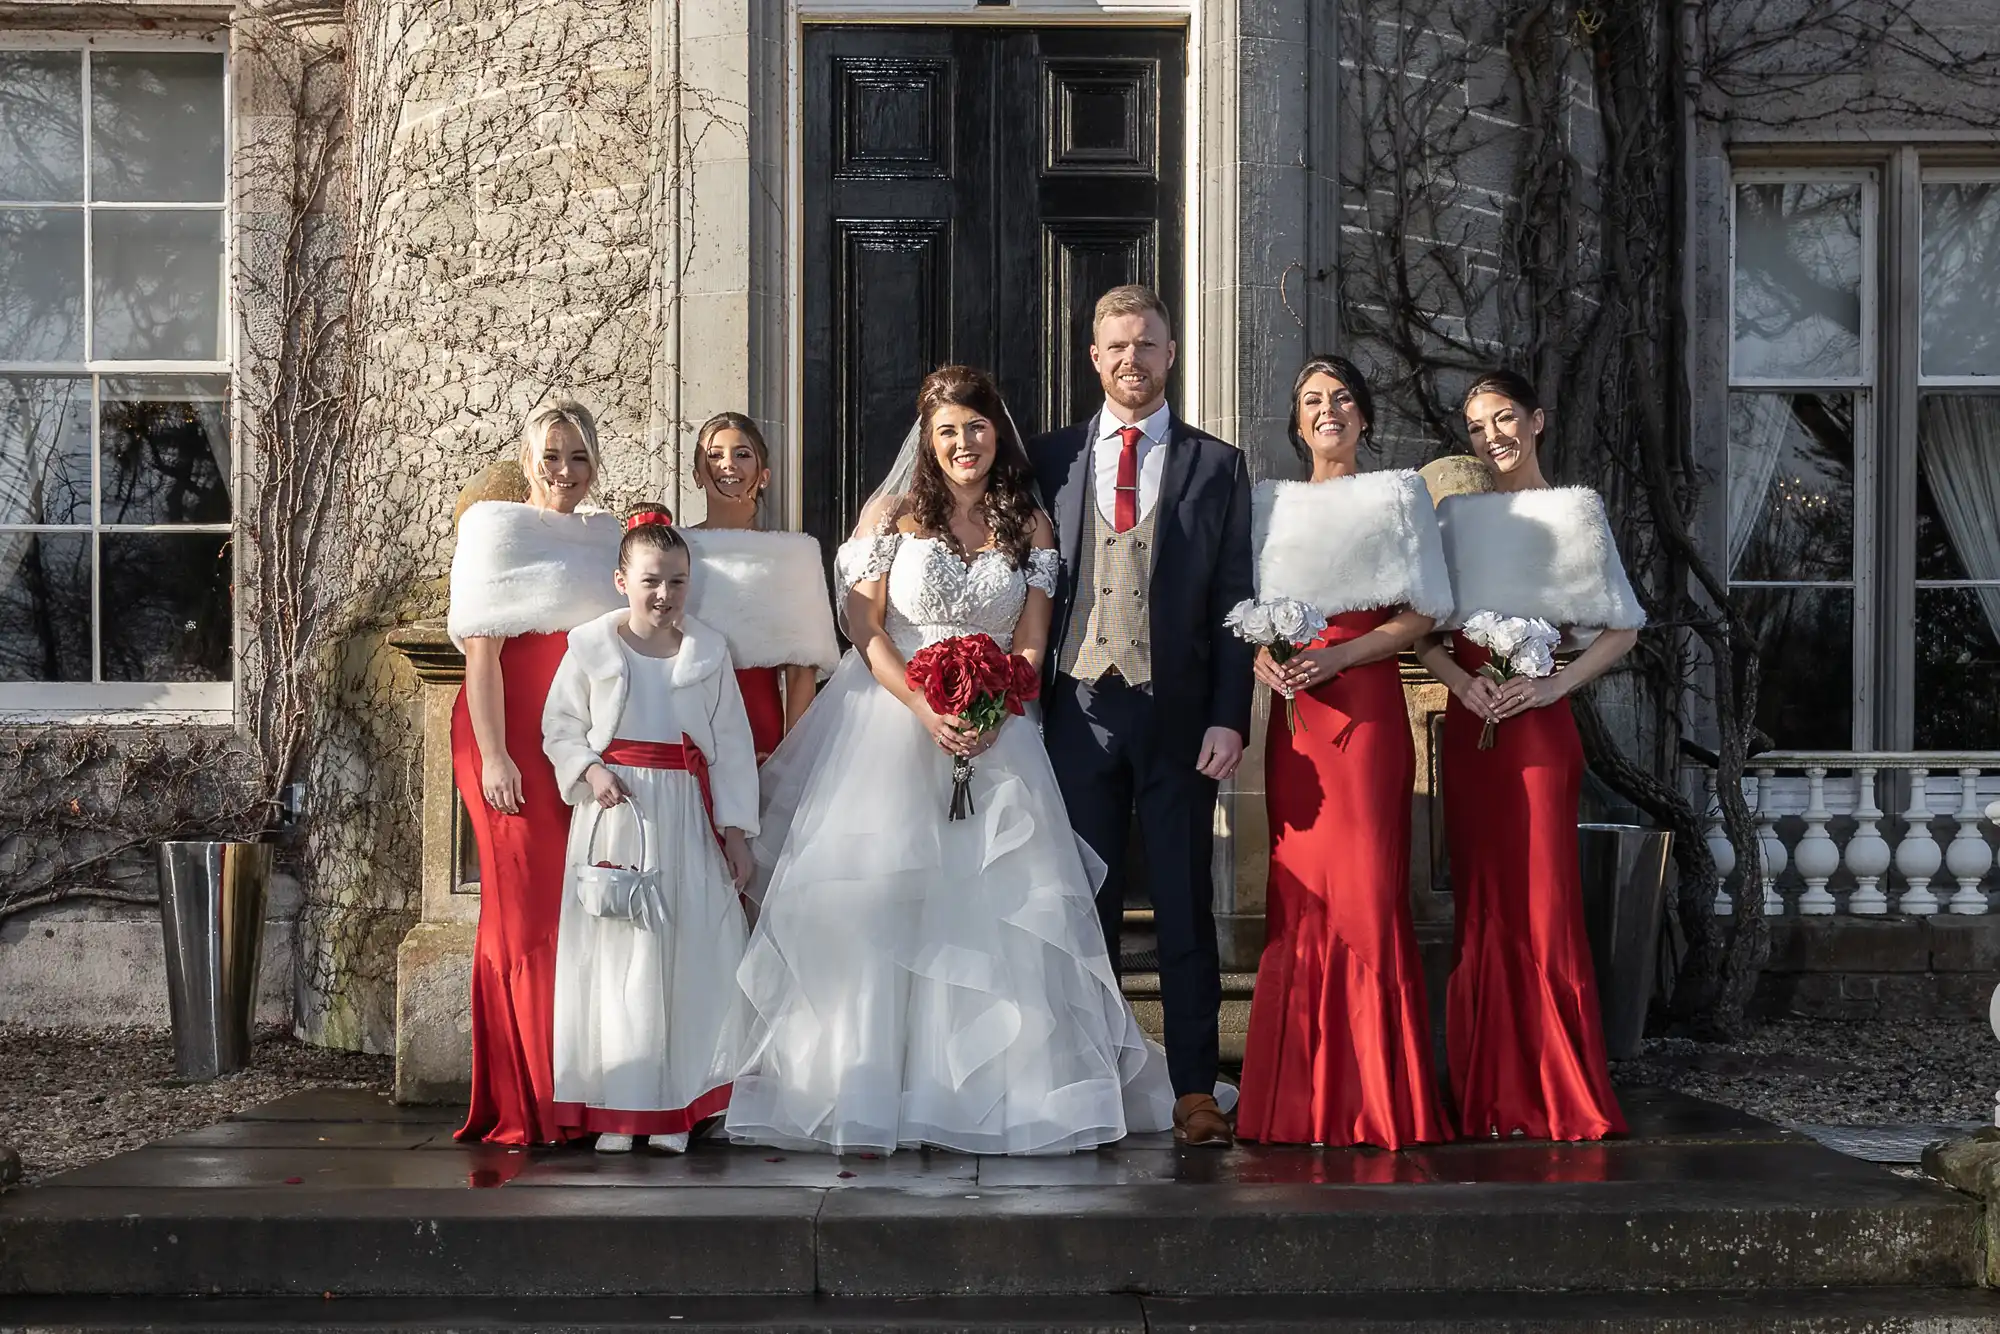 Bride and groom standing with bridesmaids and young girl, all dressed in red and white attire, posing in front of an old stone building.